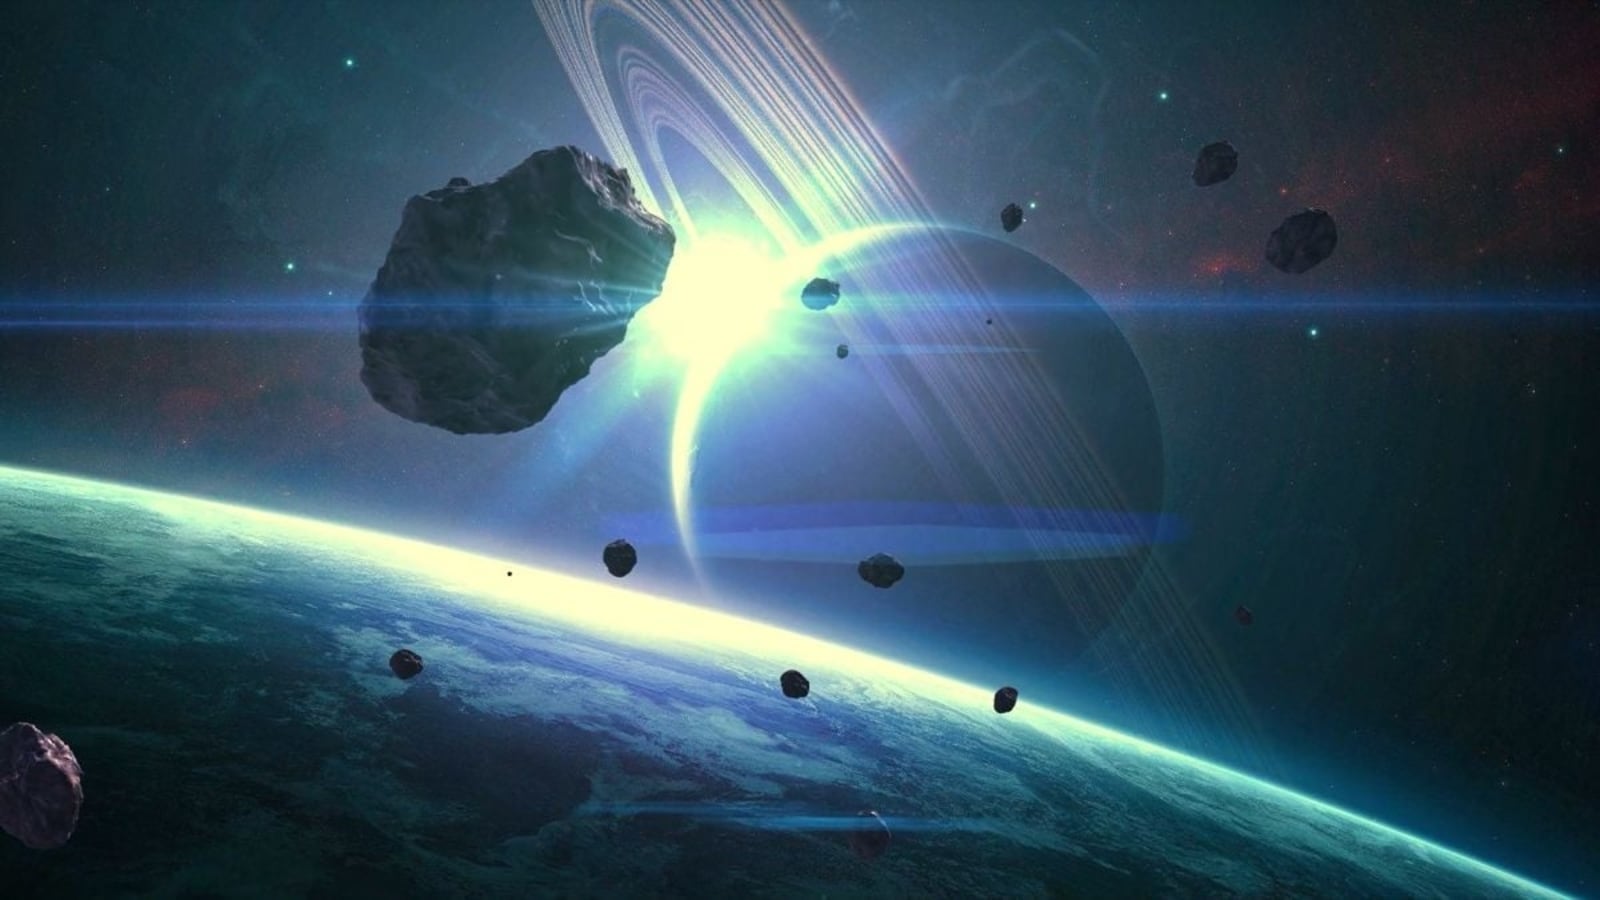 Three asteroids may fly past Earth today, reveals NASA; Check speed, size, distance and more